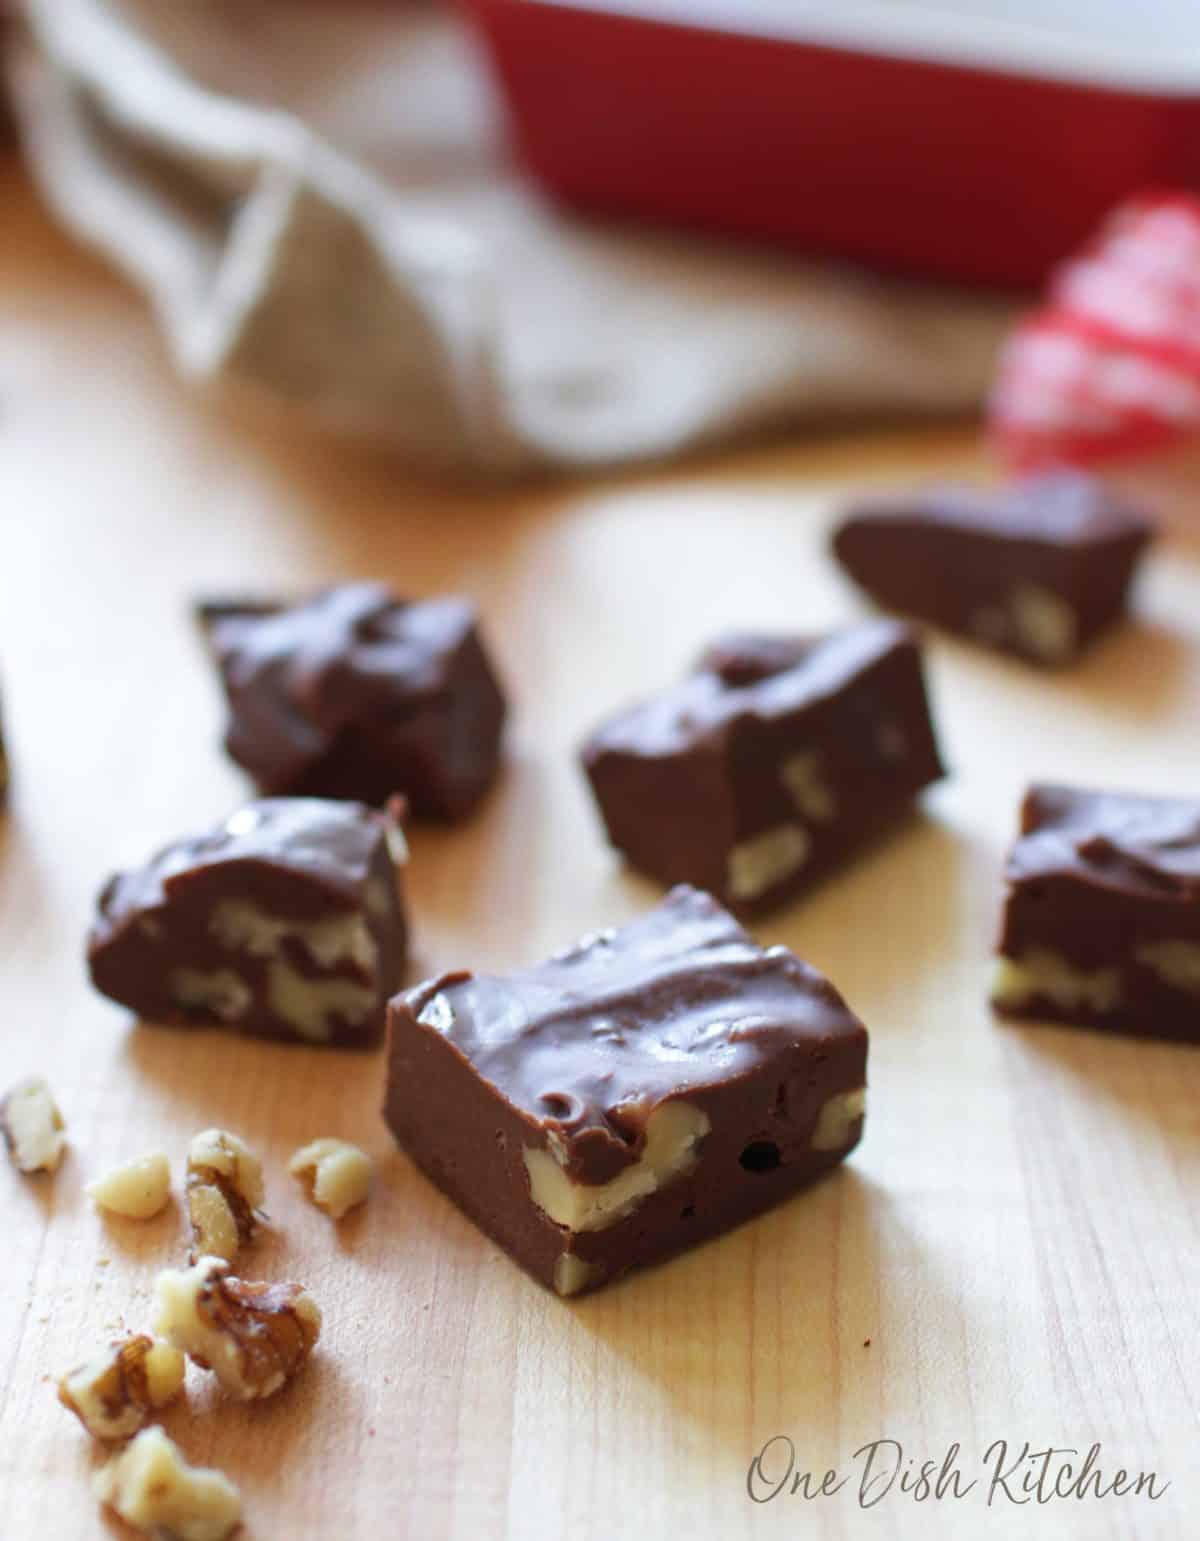 Seven squares of fudge on a brown table with scattered walnuts around the fudge.